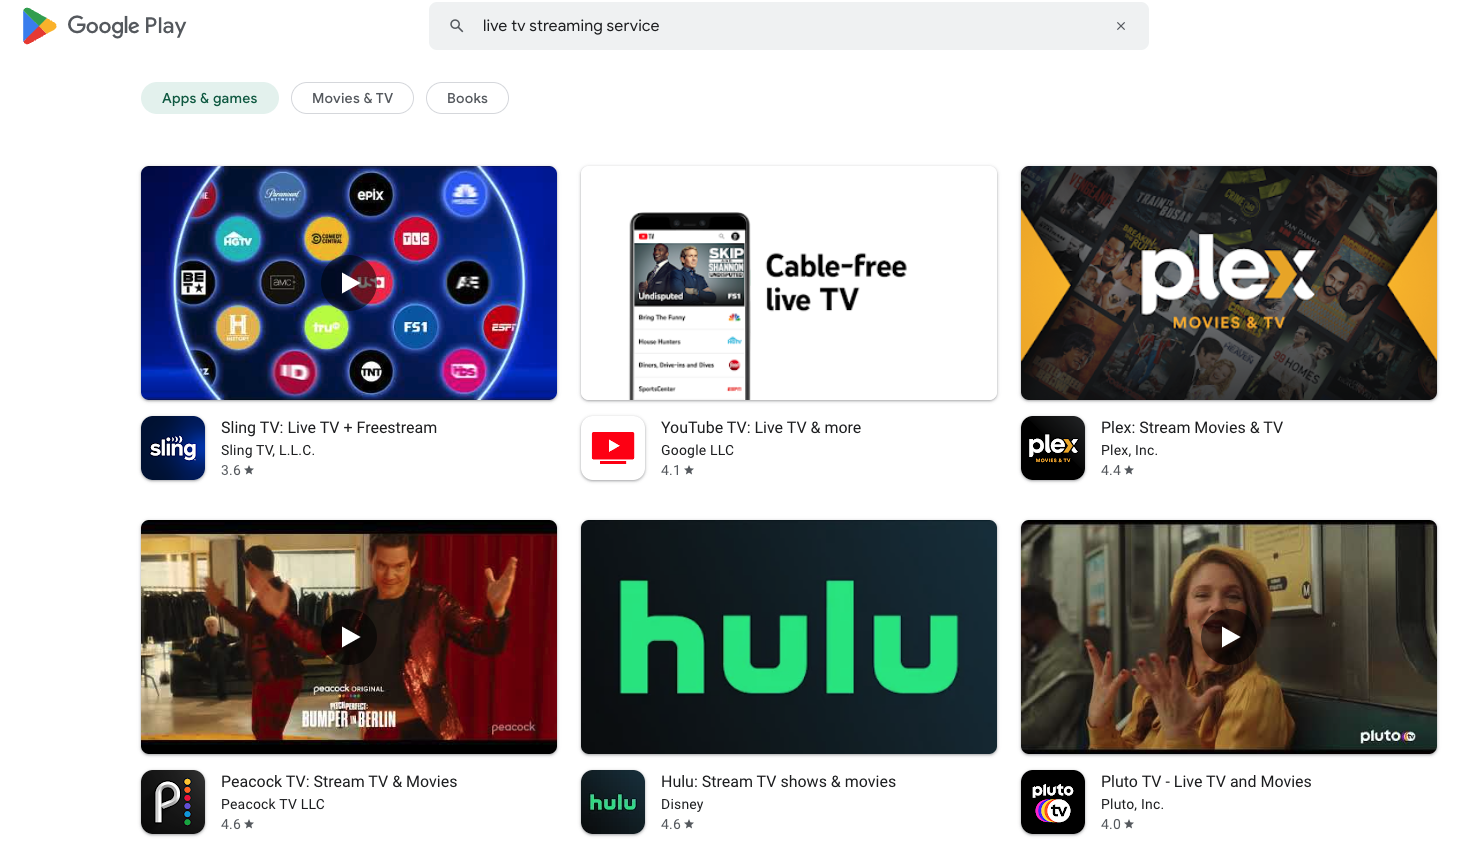 Verified IPTV Services in the Google Play Store